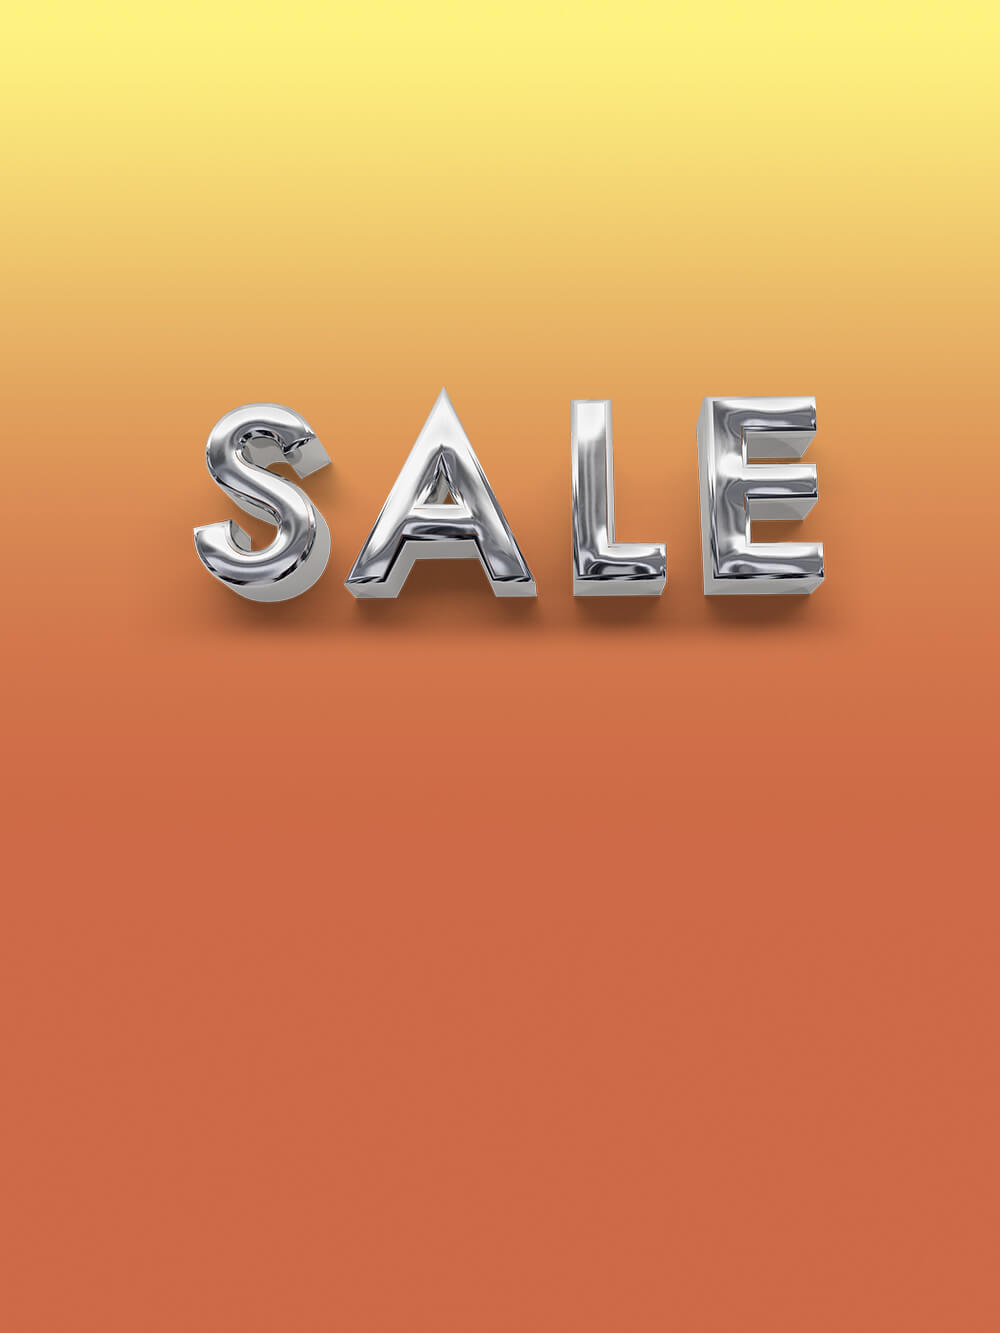 End of Season Sale: Up to 20% off online and in stores